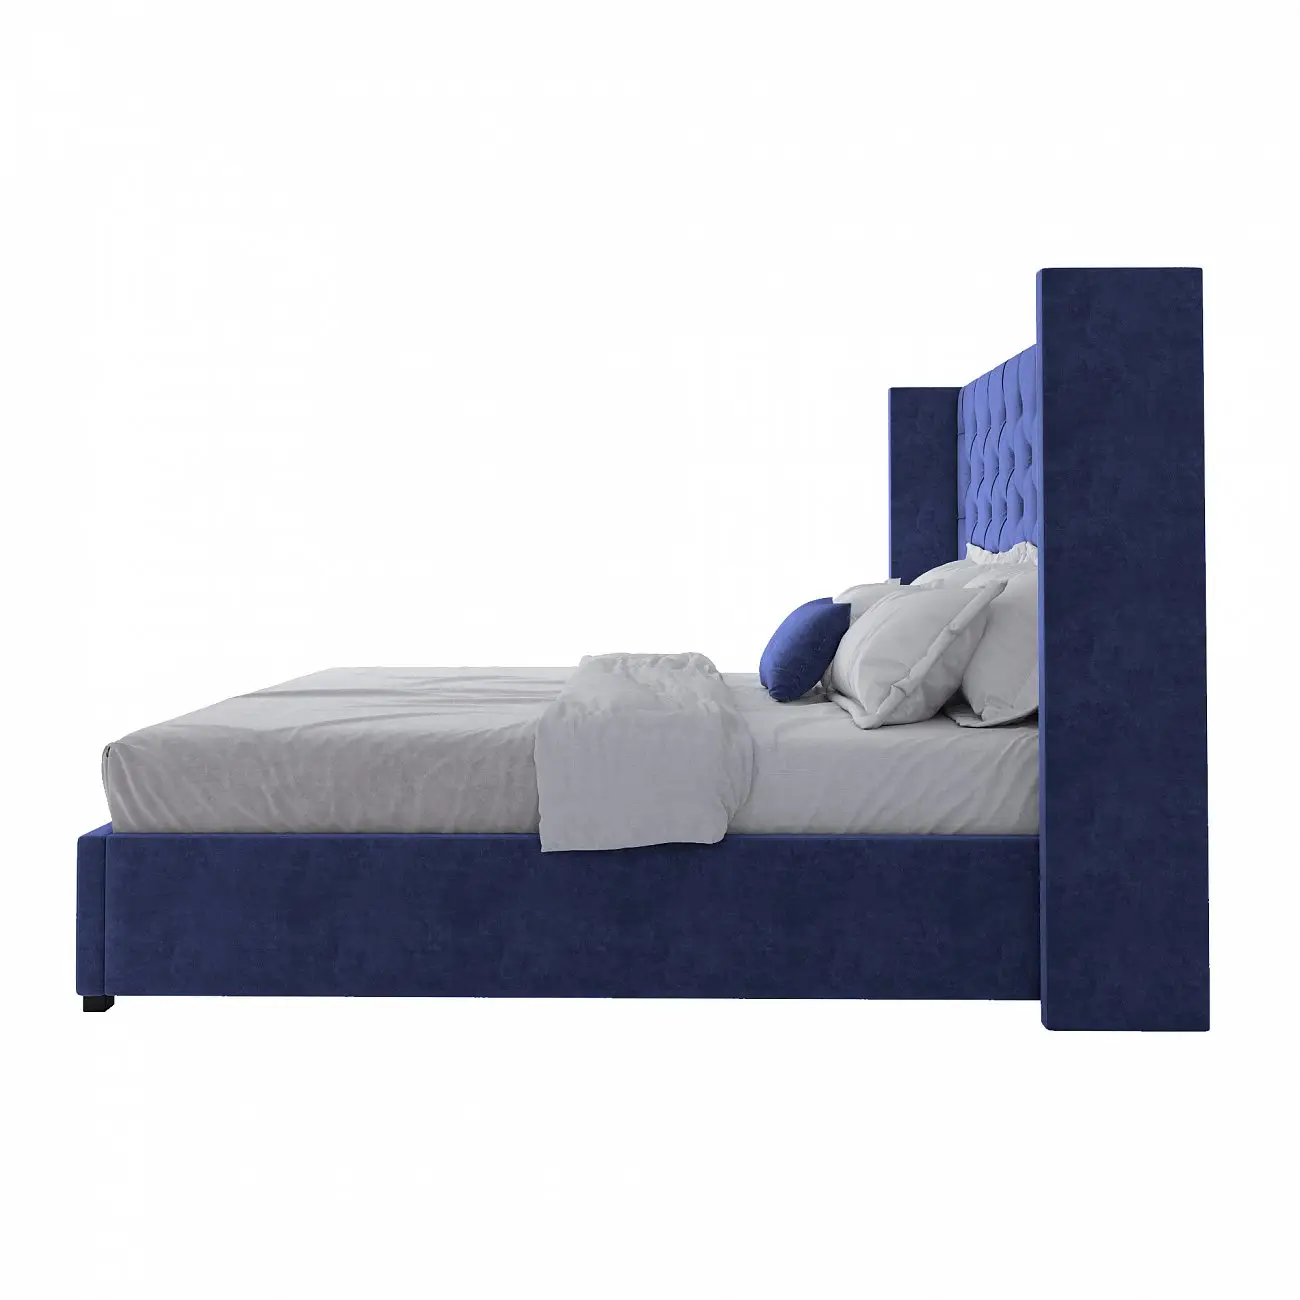 Double bed with upholstered headboard 180x200 cm dark blue Wing-2